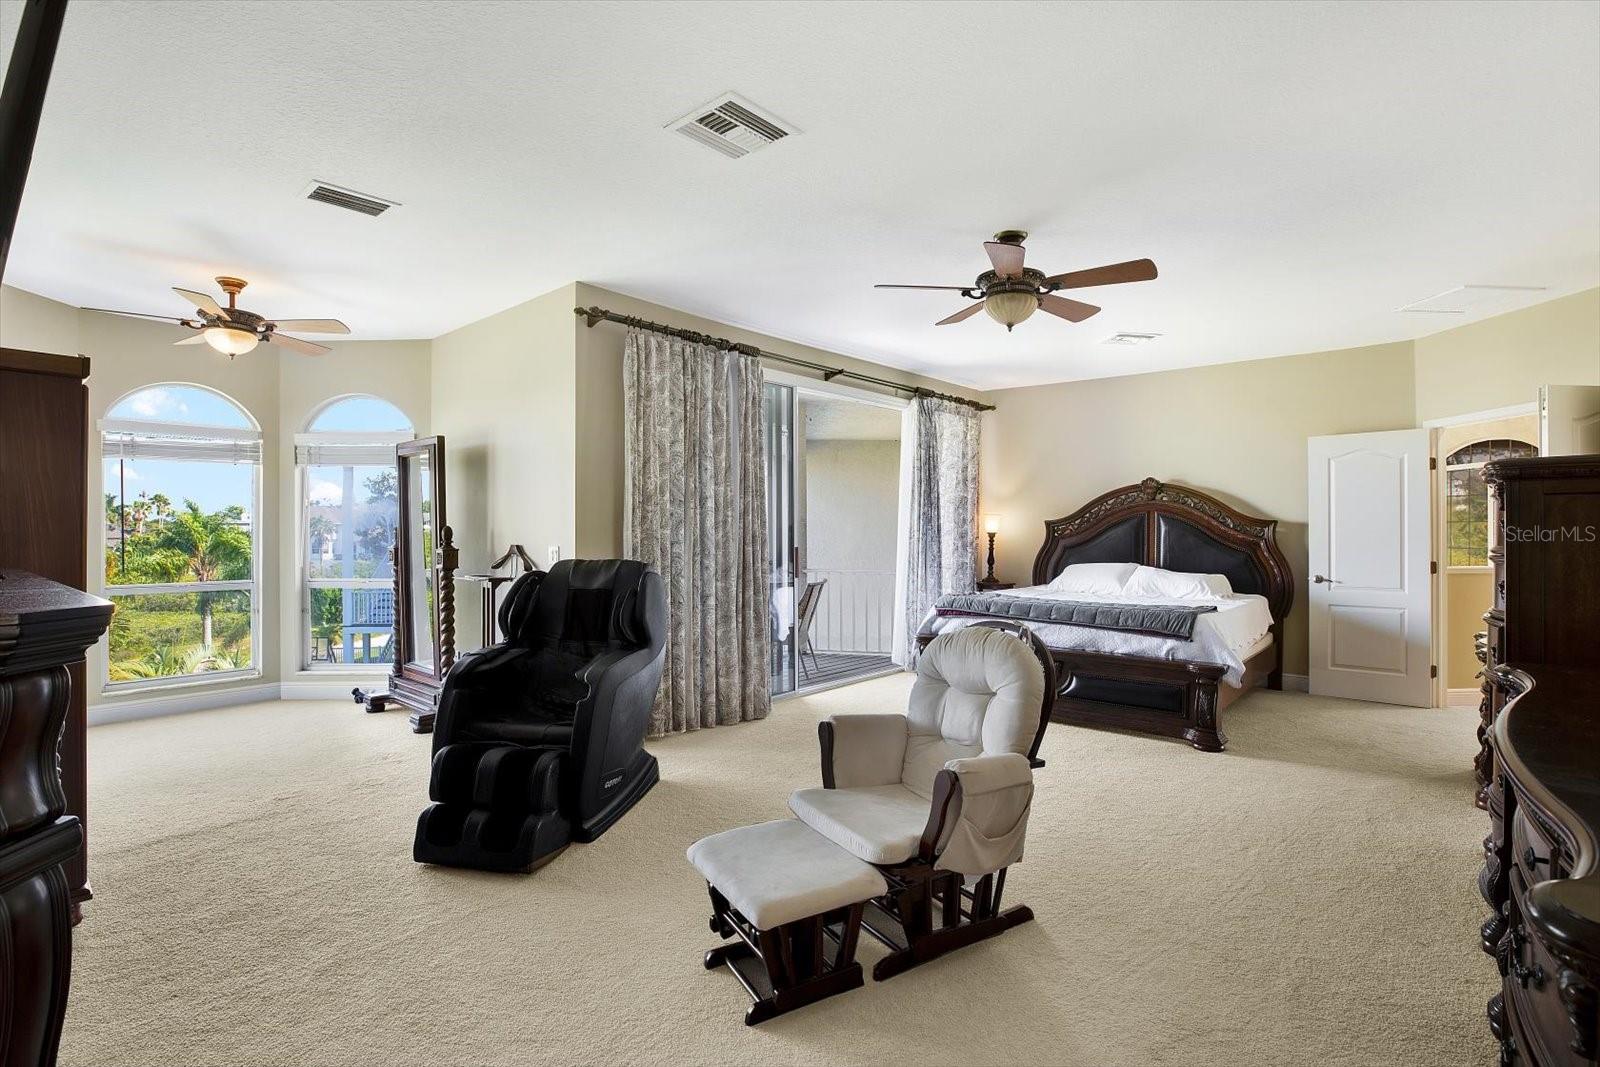 Bring your biggest and best bedroom furniture to fill this spacious retreat